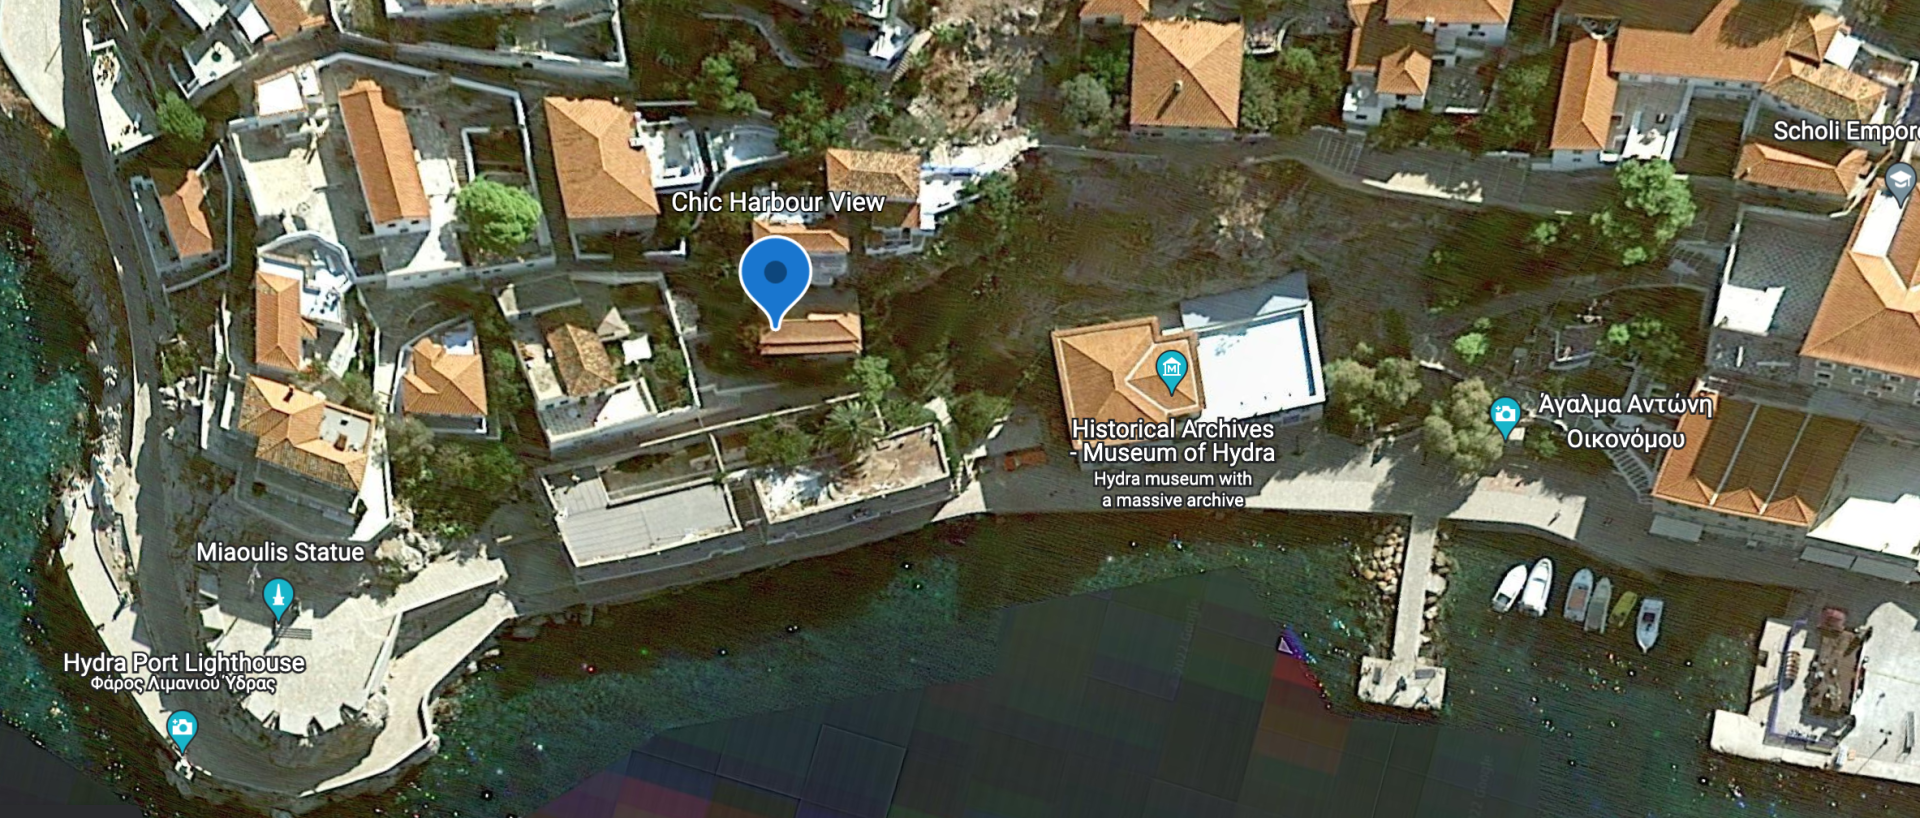 Location Map for Chic Harbour View on Hydra Island Greece